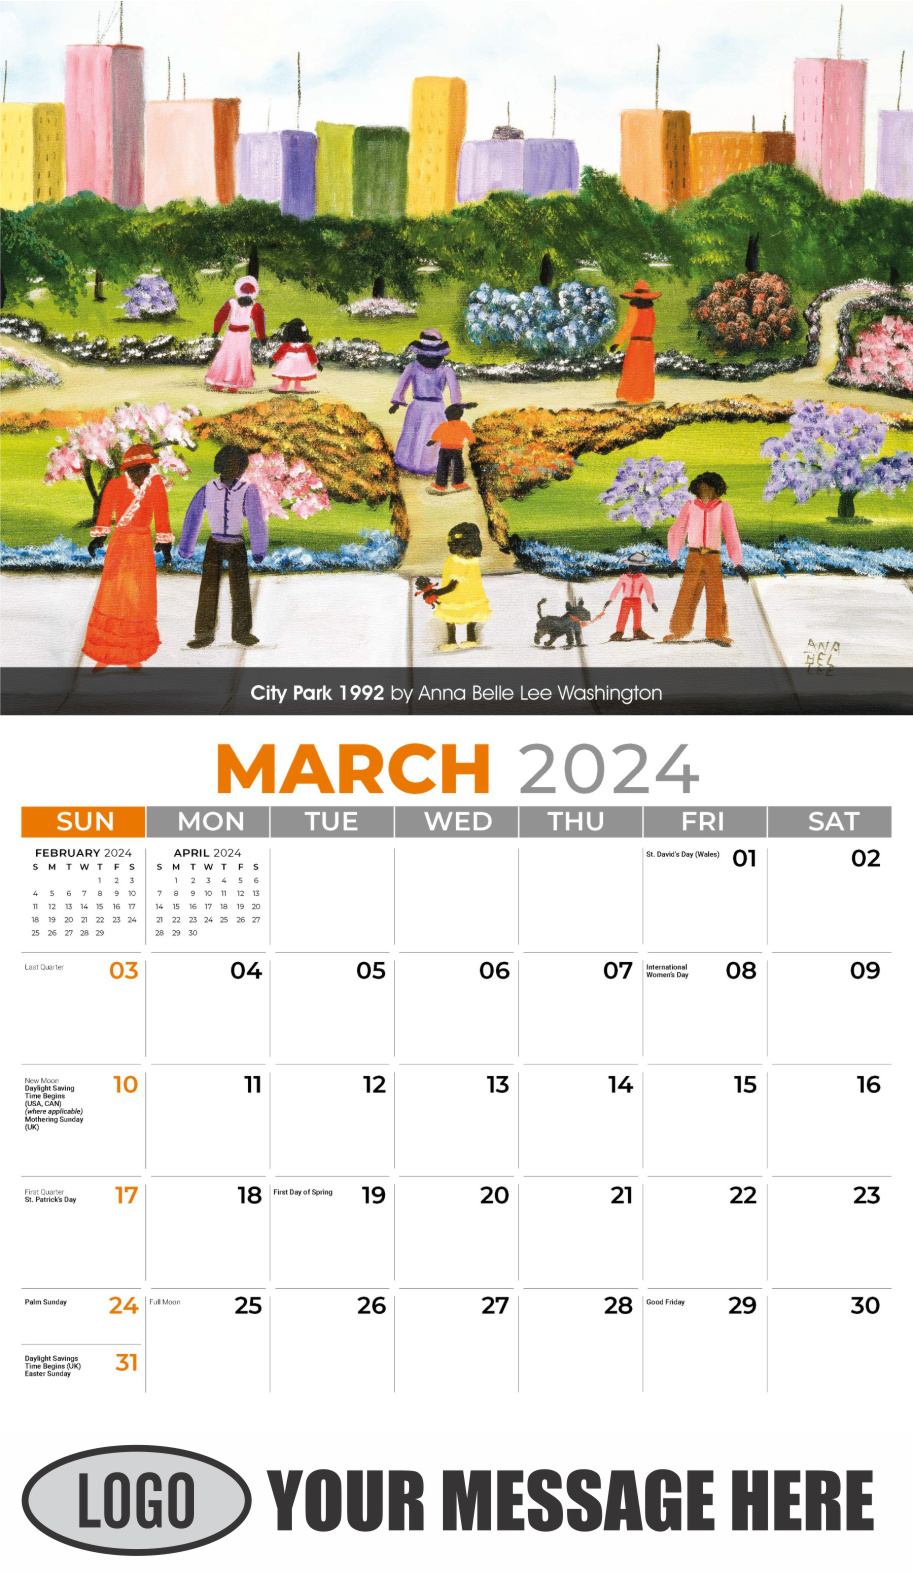 Celebration of African American Art 2024 Business Promotional Calendar - March